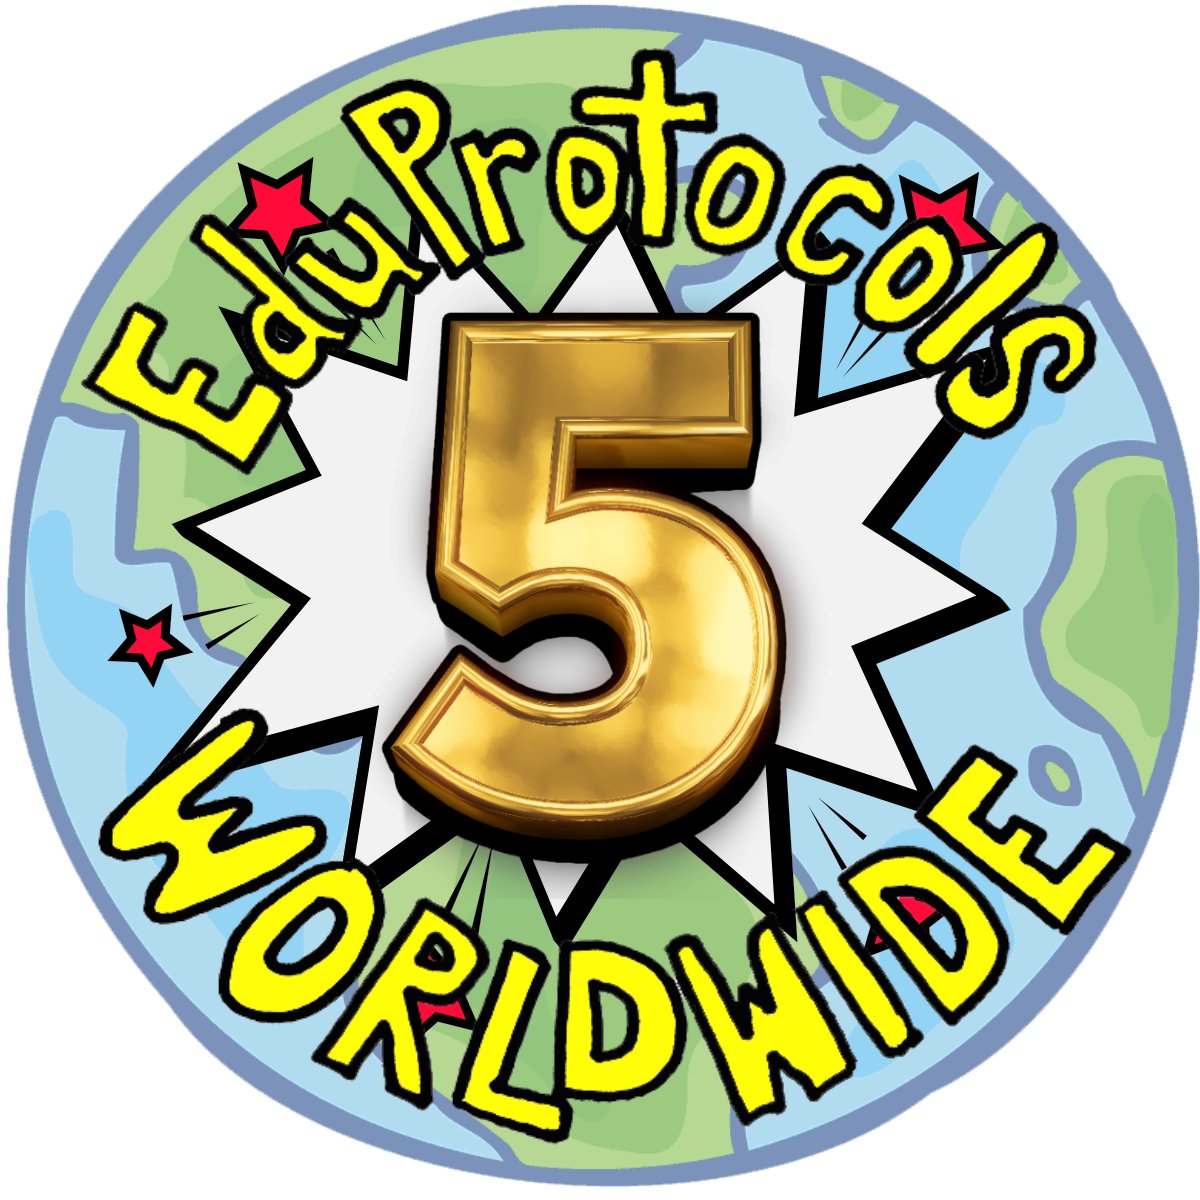 Looking for FREE teacher PD? Don't miss these great #SocialStudies sessions from @JustinUnruh16 @MrMayfieldRHS & @Sheila__Edwards  eduprotocolsplus.com/eduprotocols-w… #sschat #EduProtocols #EPWW5